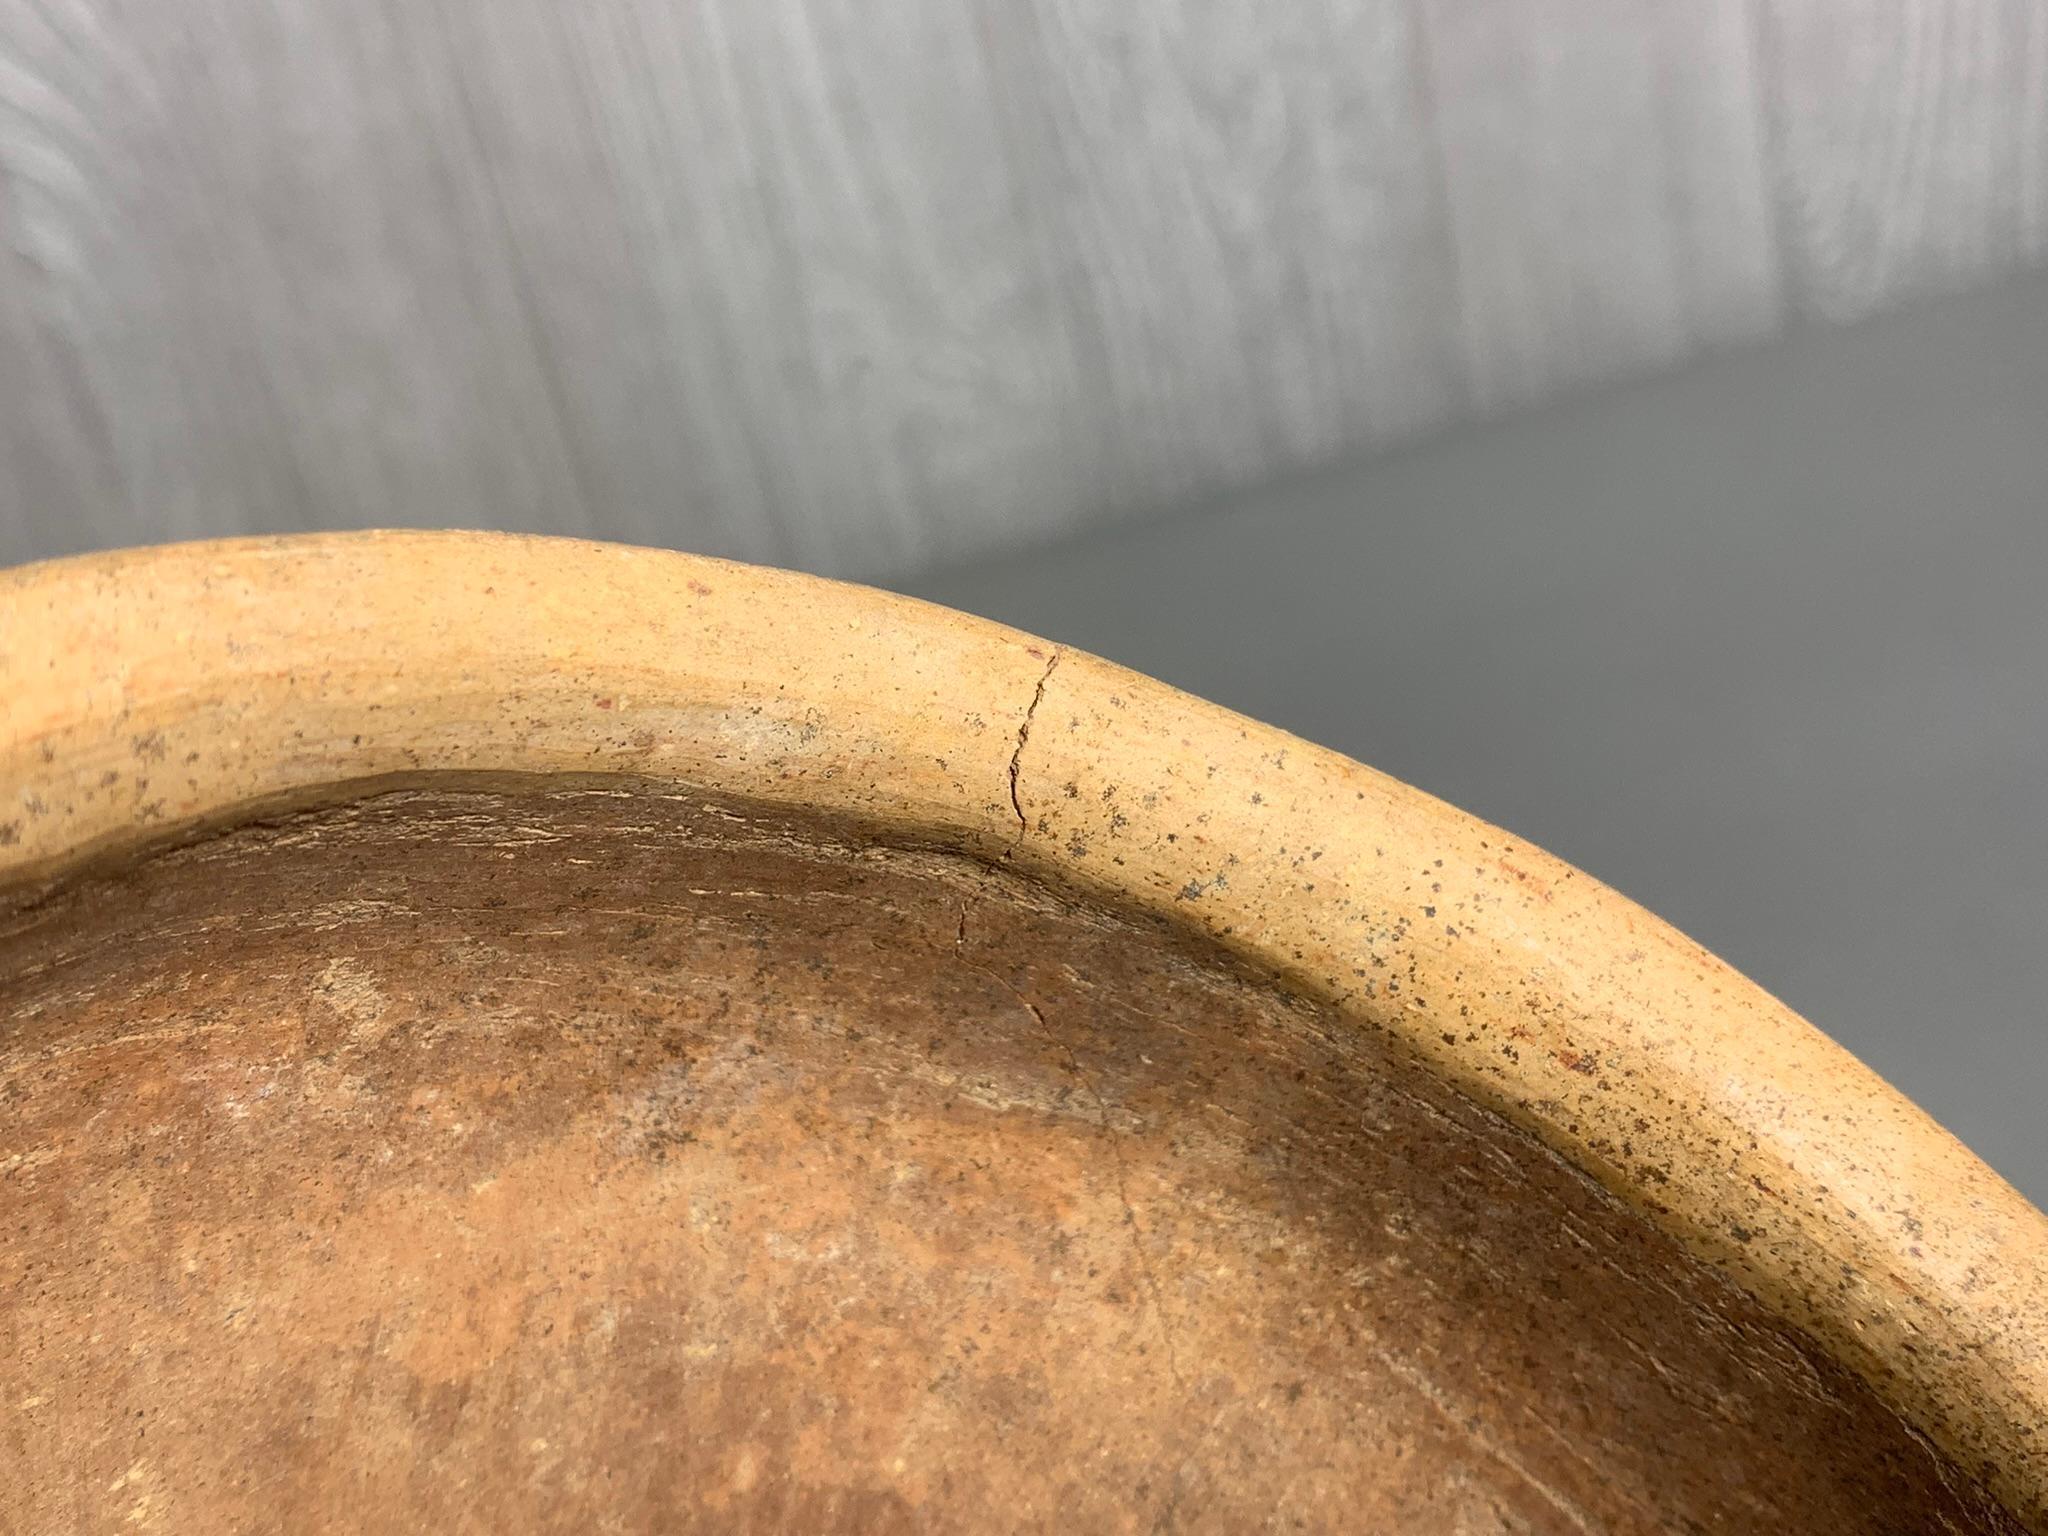 Pre Columbian Footed Bowl Paint Decorated Columbian